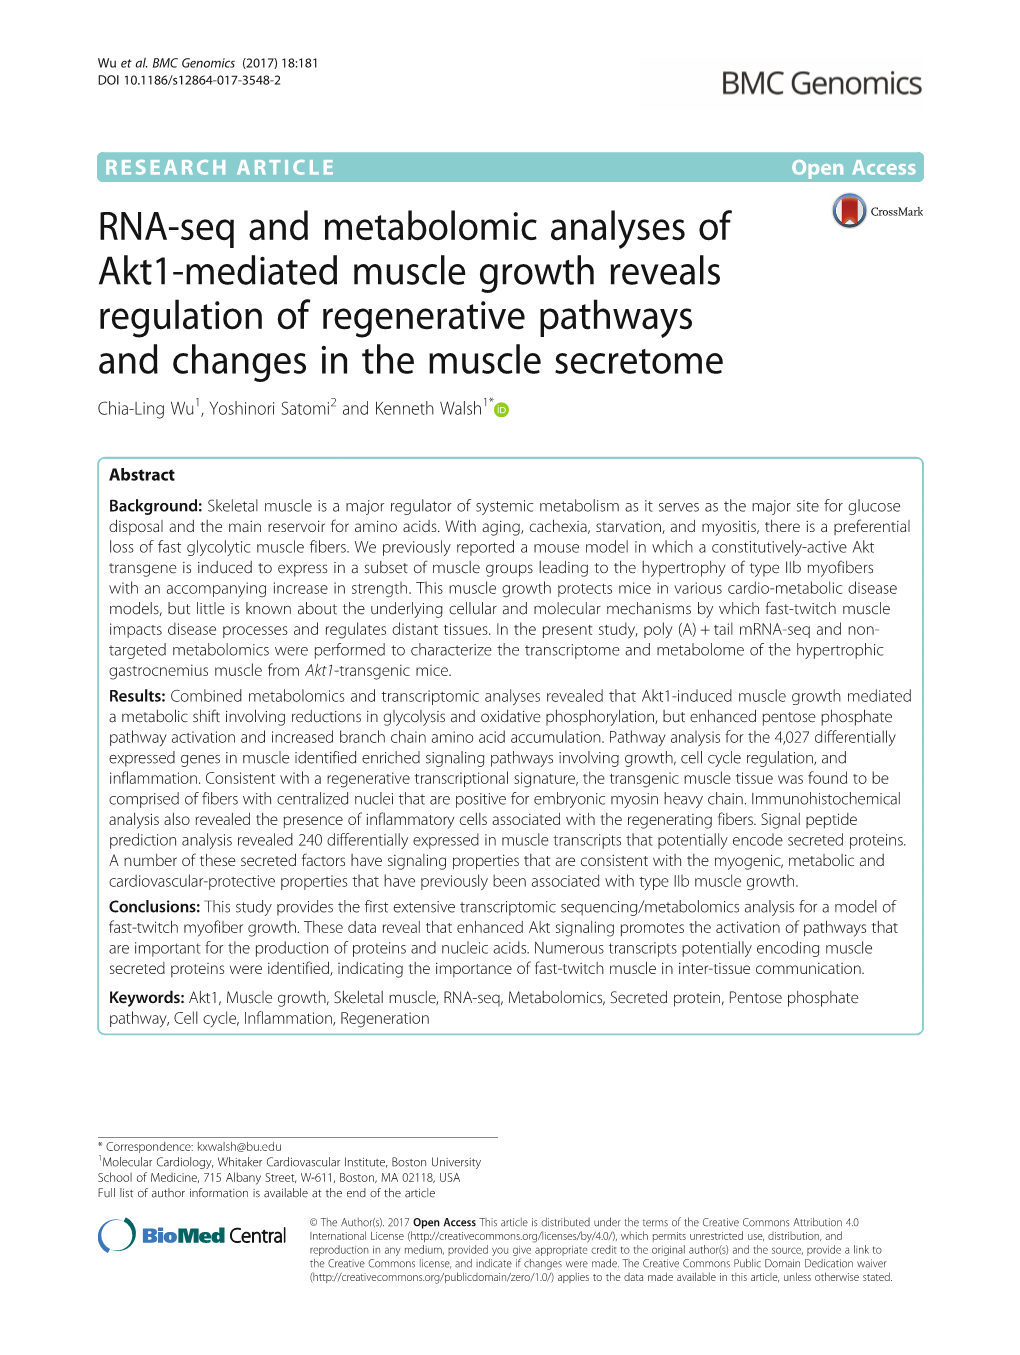 RNA-Seq and Metabolomic Analyses of Akt1-Mediated Muscle Growth